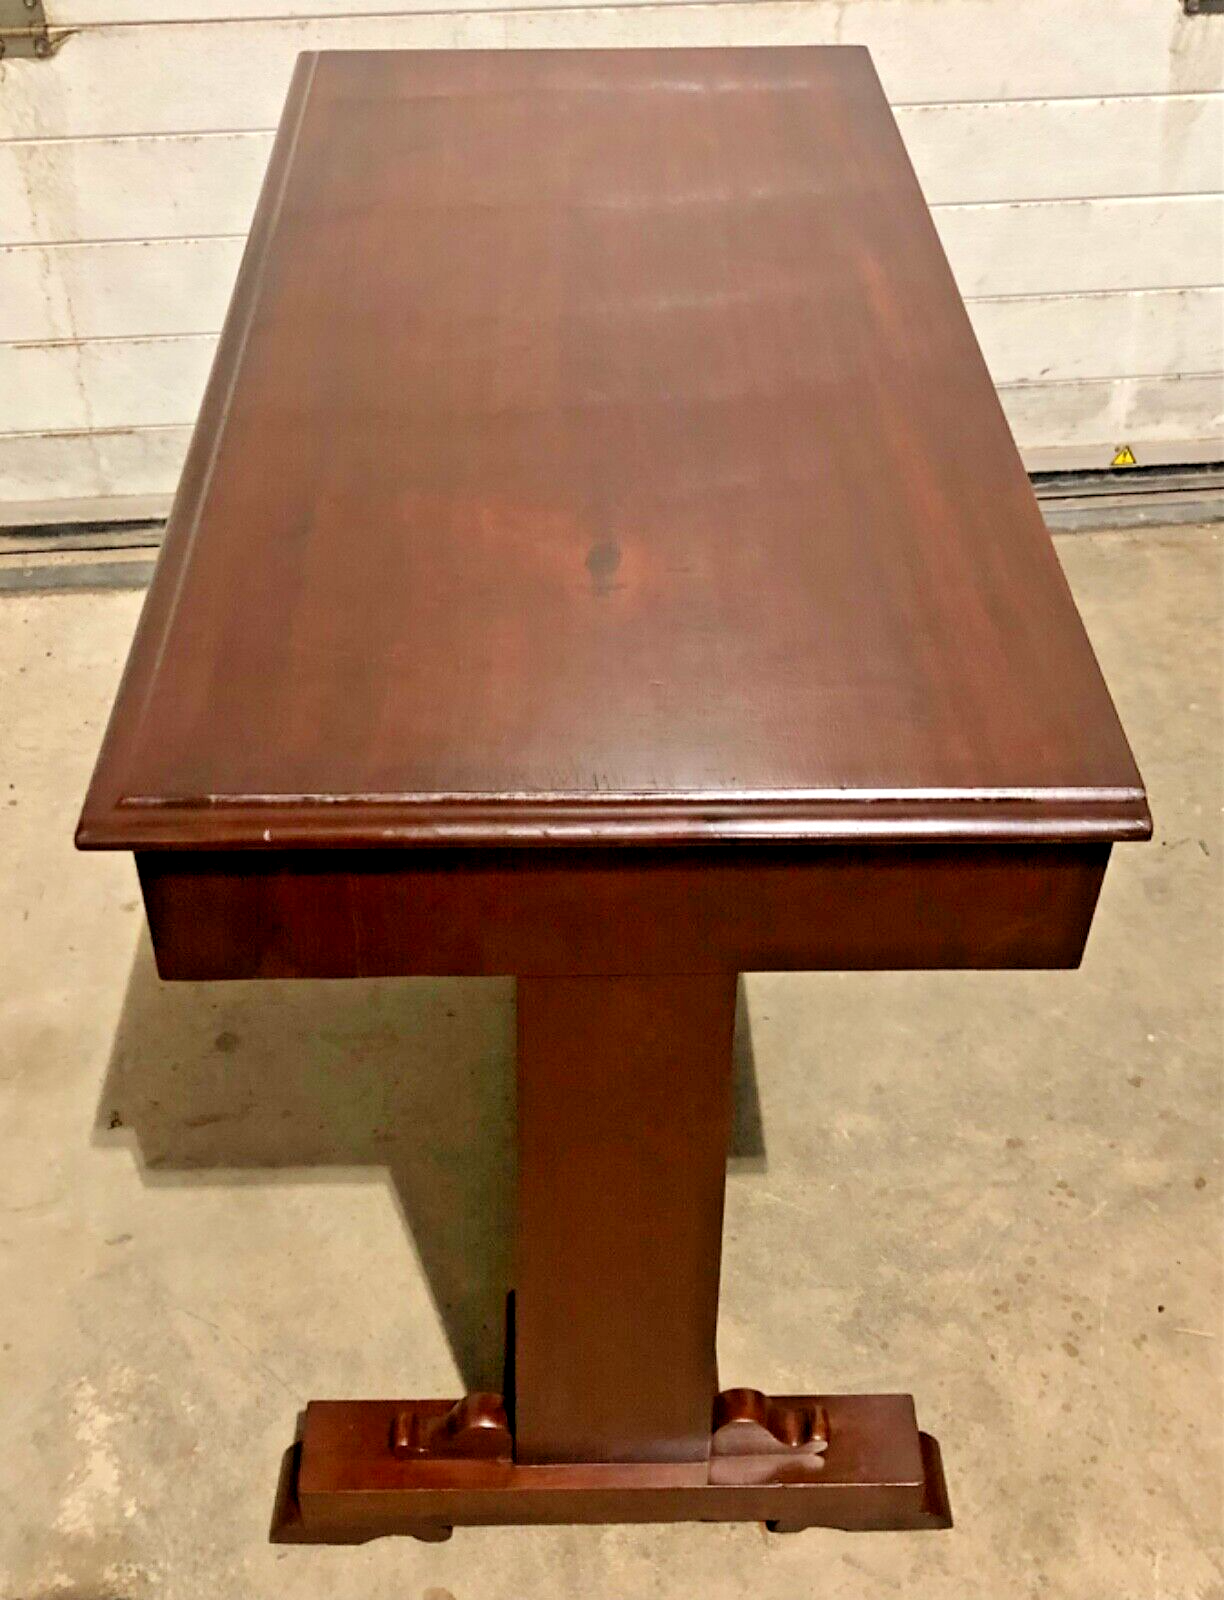 000770....Handsome Antique Mahogany Writing / Side Table